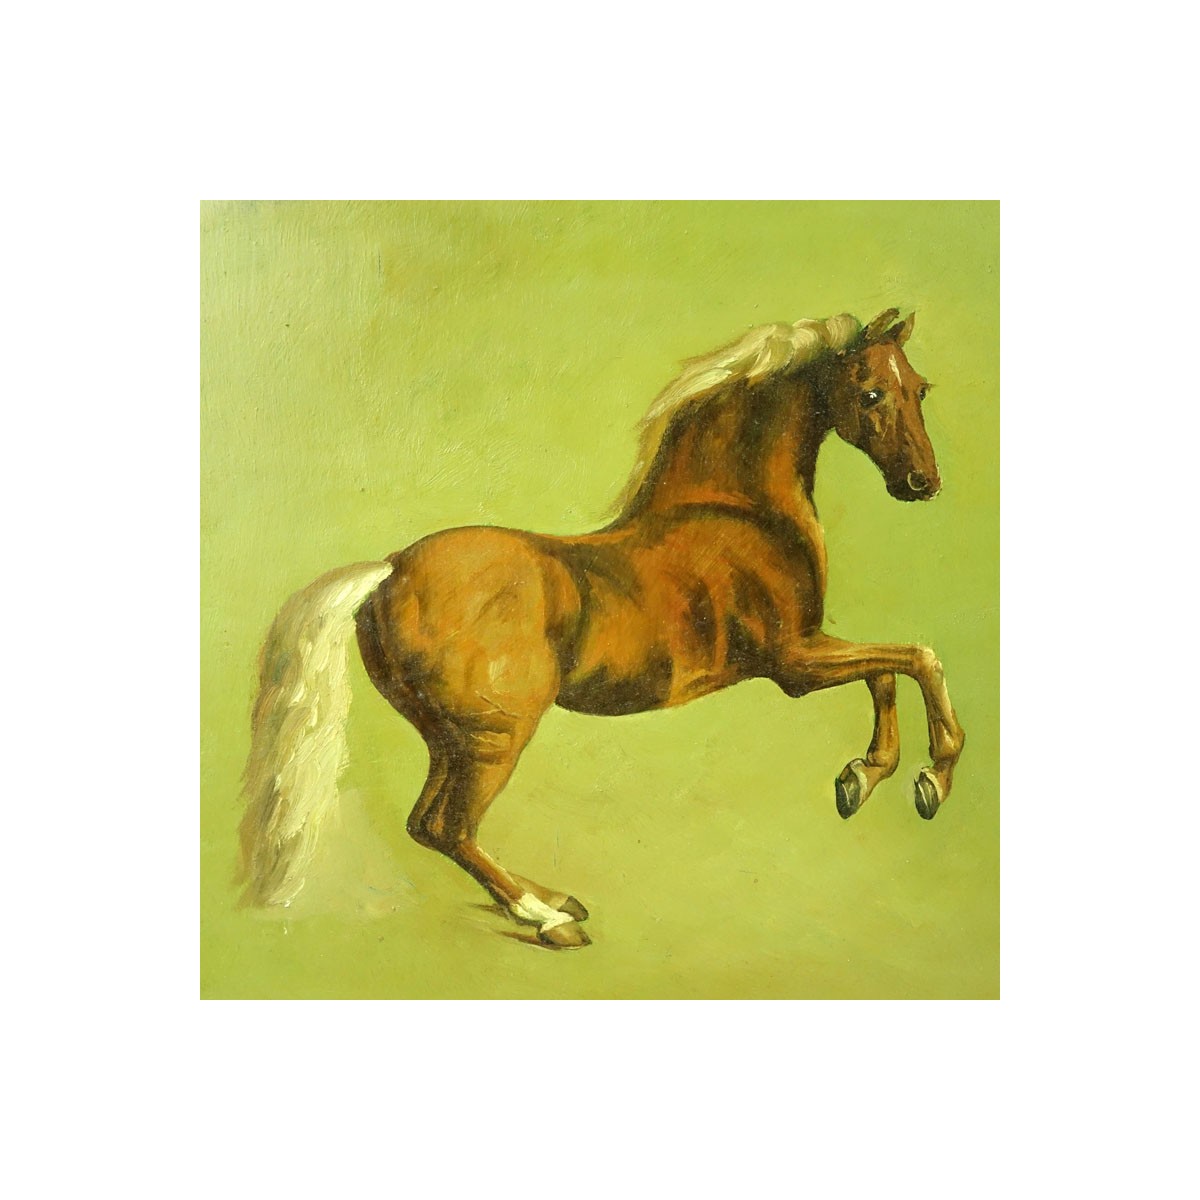 20th Century Oil On Board "Horse". Unsigned. Minor losses. Measures 16" x 12", frame measures 24-3/